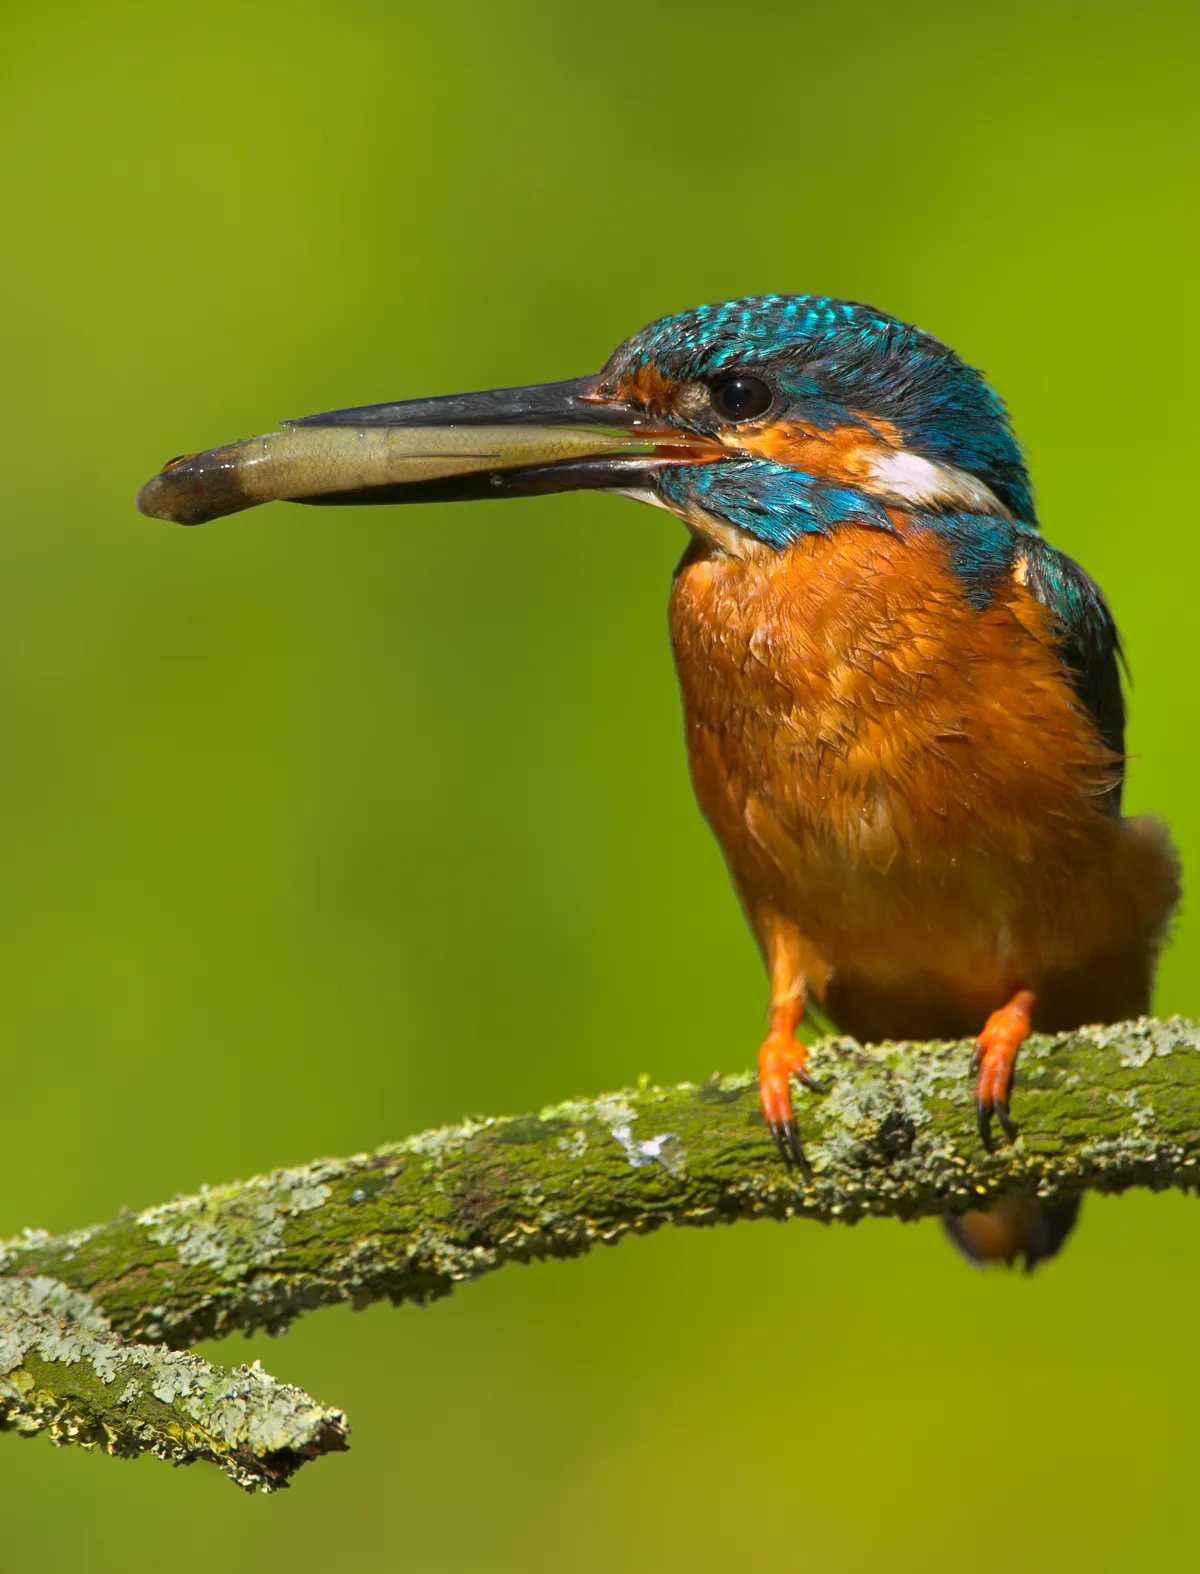 A kingfisher with a fish in its beak. © Andy Rouse/Getty